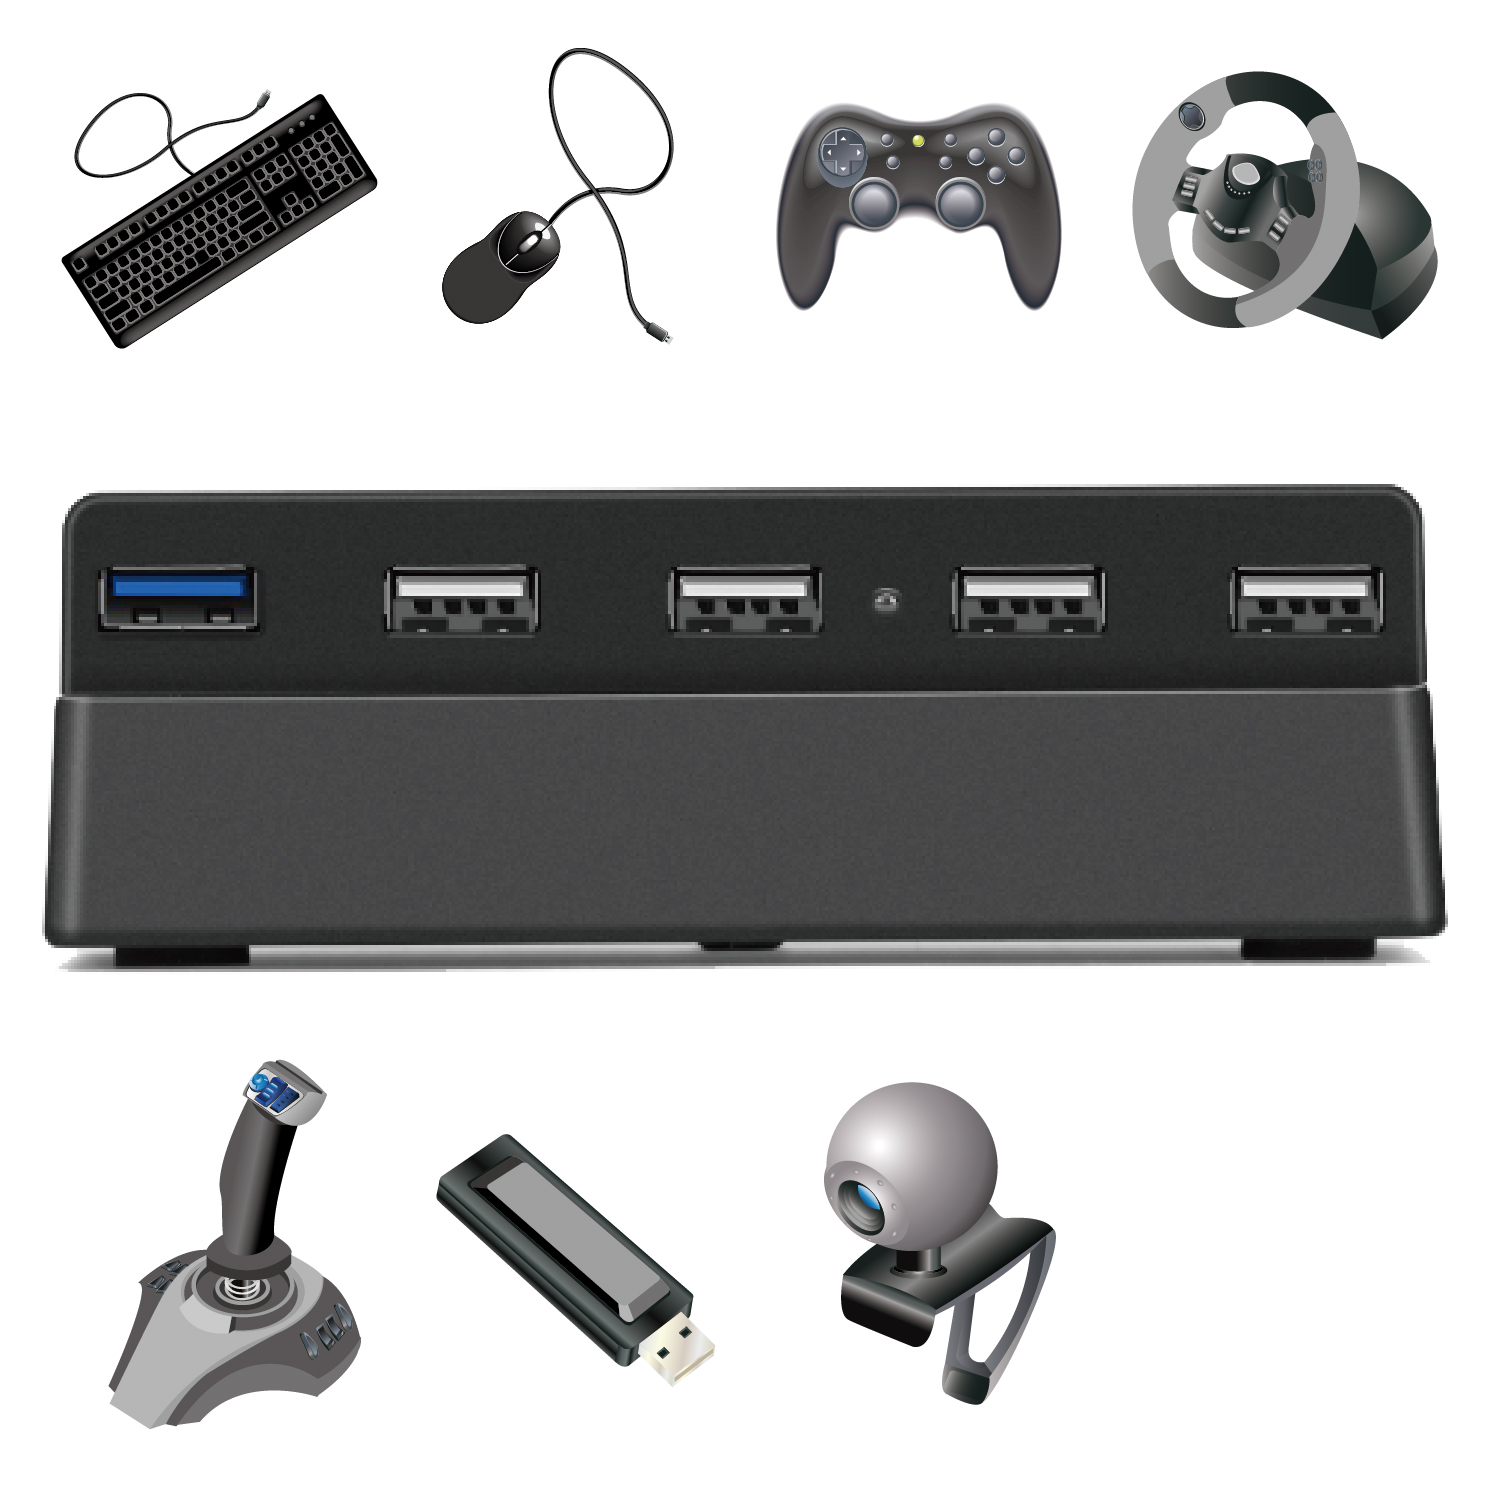 5 Port USB Hub for PS4 Slim USB 3.0 2.0 Adapter Accessories Expansion Hub  PS4S